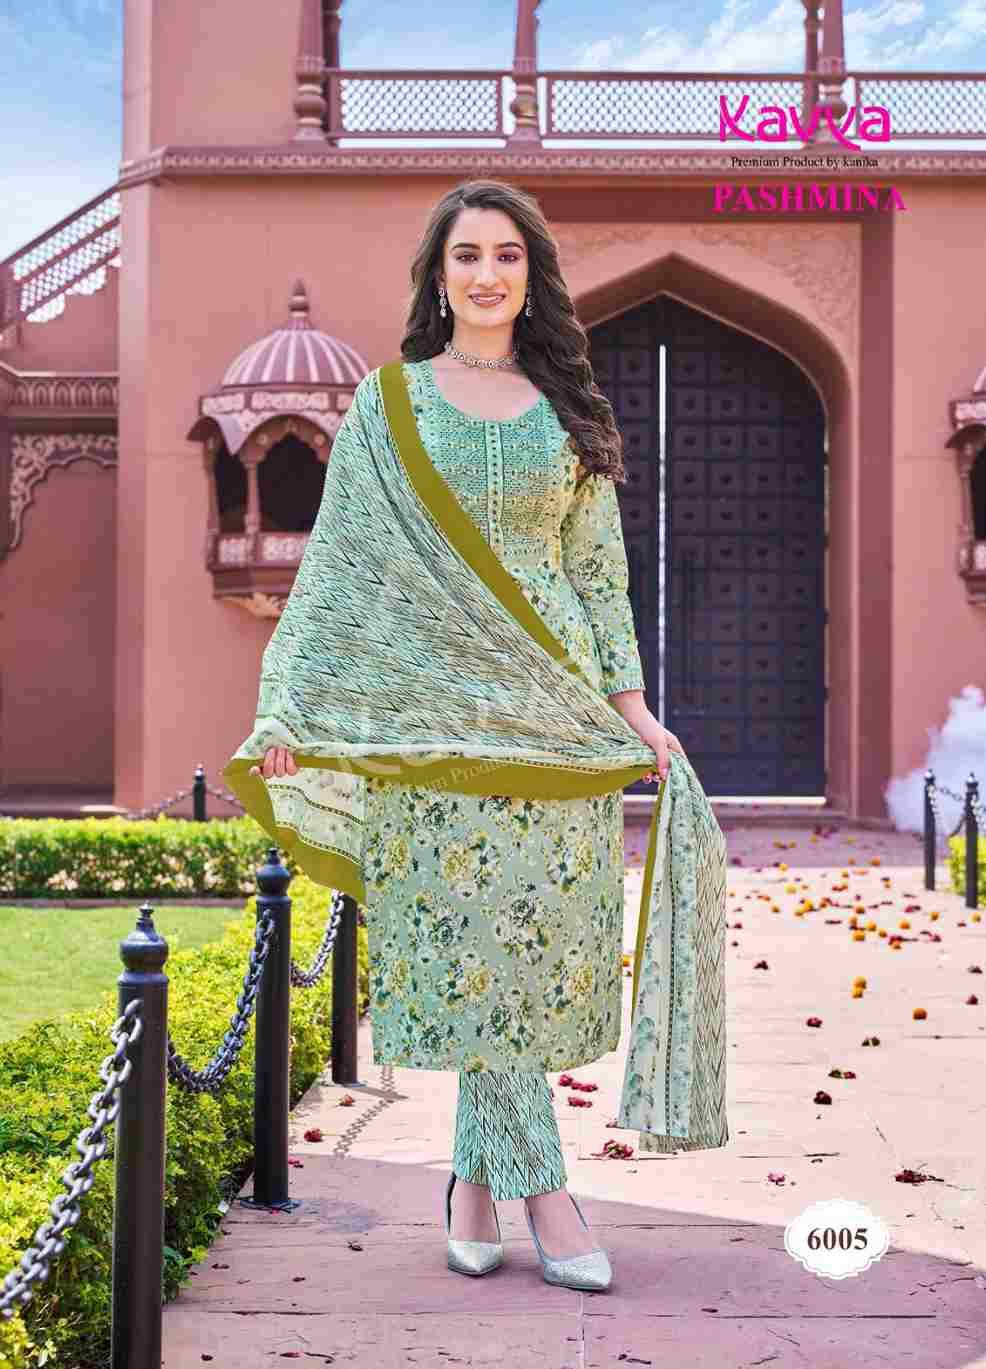 Pashmina Vol-6 By Kavya 6001 To 6010 Series Beautiful Stylish Festive Suits Fancy Colorful Casual Wear & Ethnic Wear & Ready To Wear Cotton Print Dresses At Wholesale Price